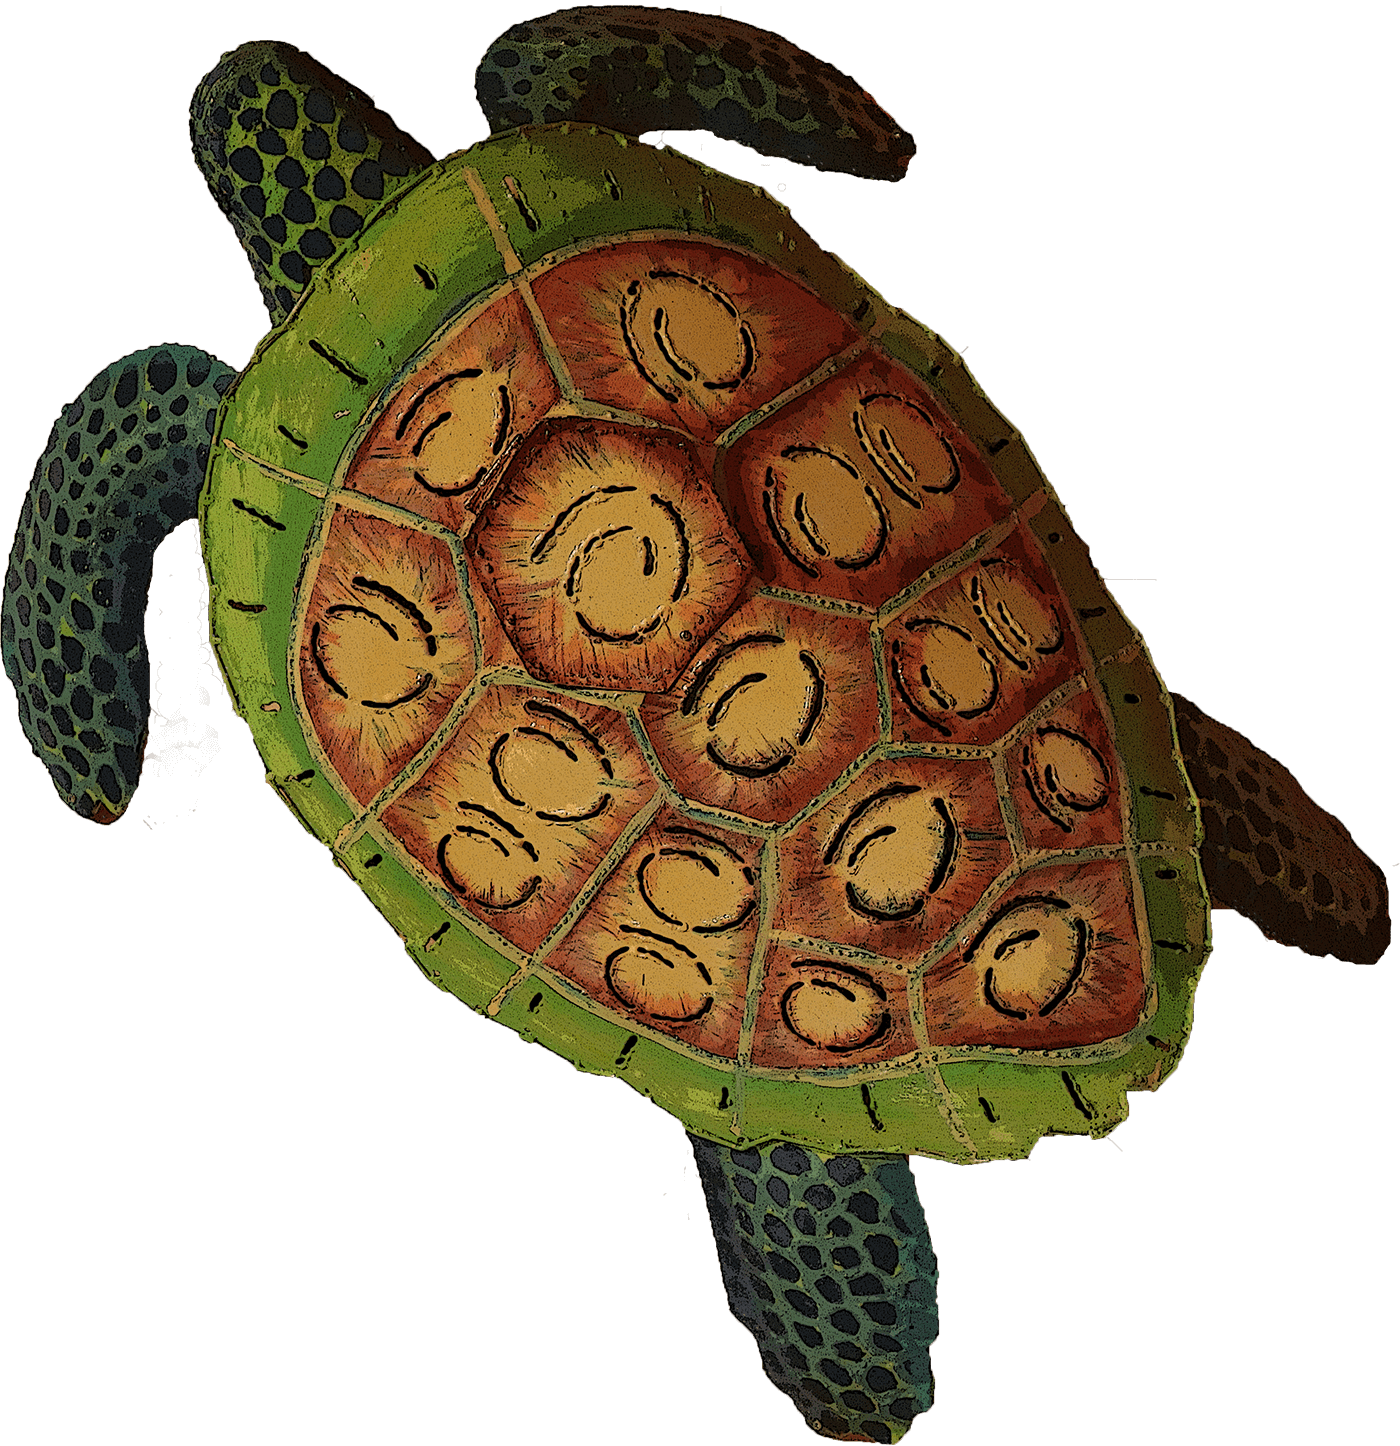 A faded image of a turtle illustration